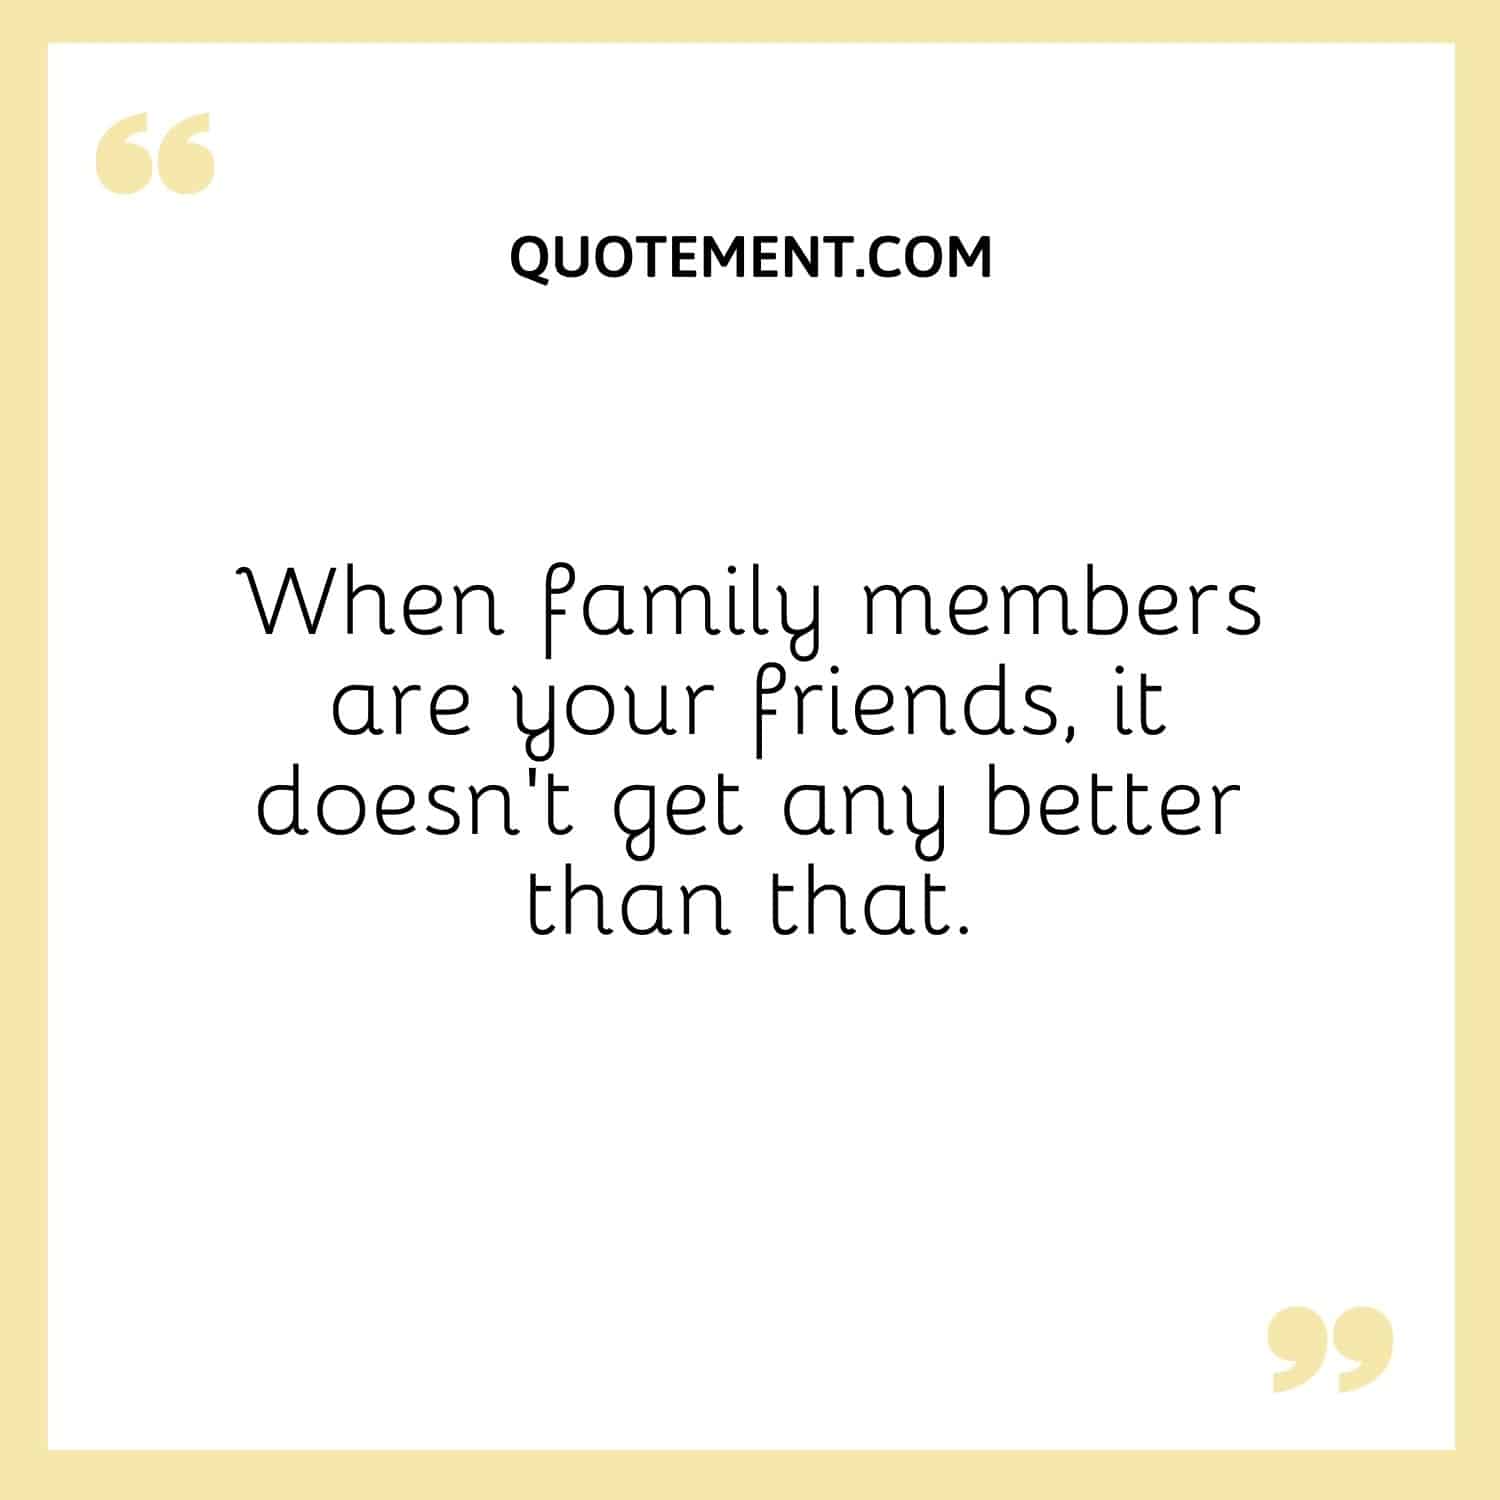 When family members are your friends, it doesn't get any better than that.